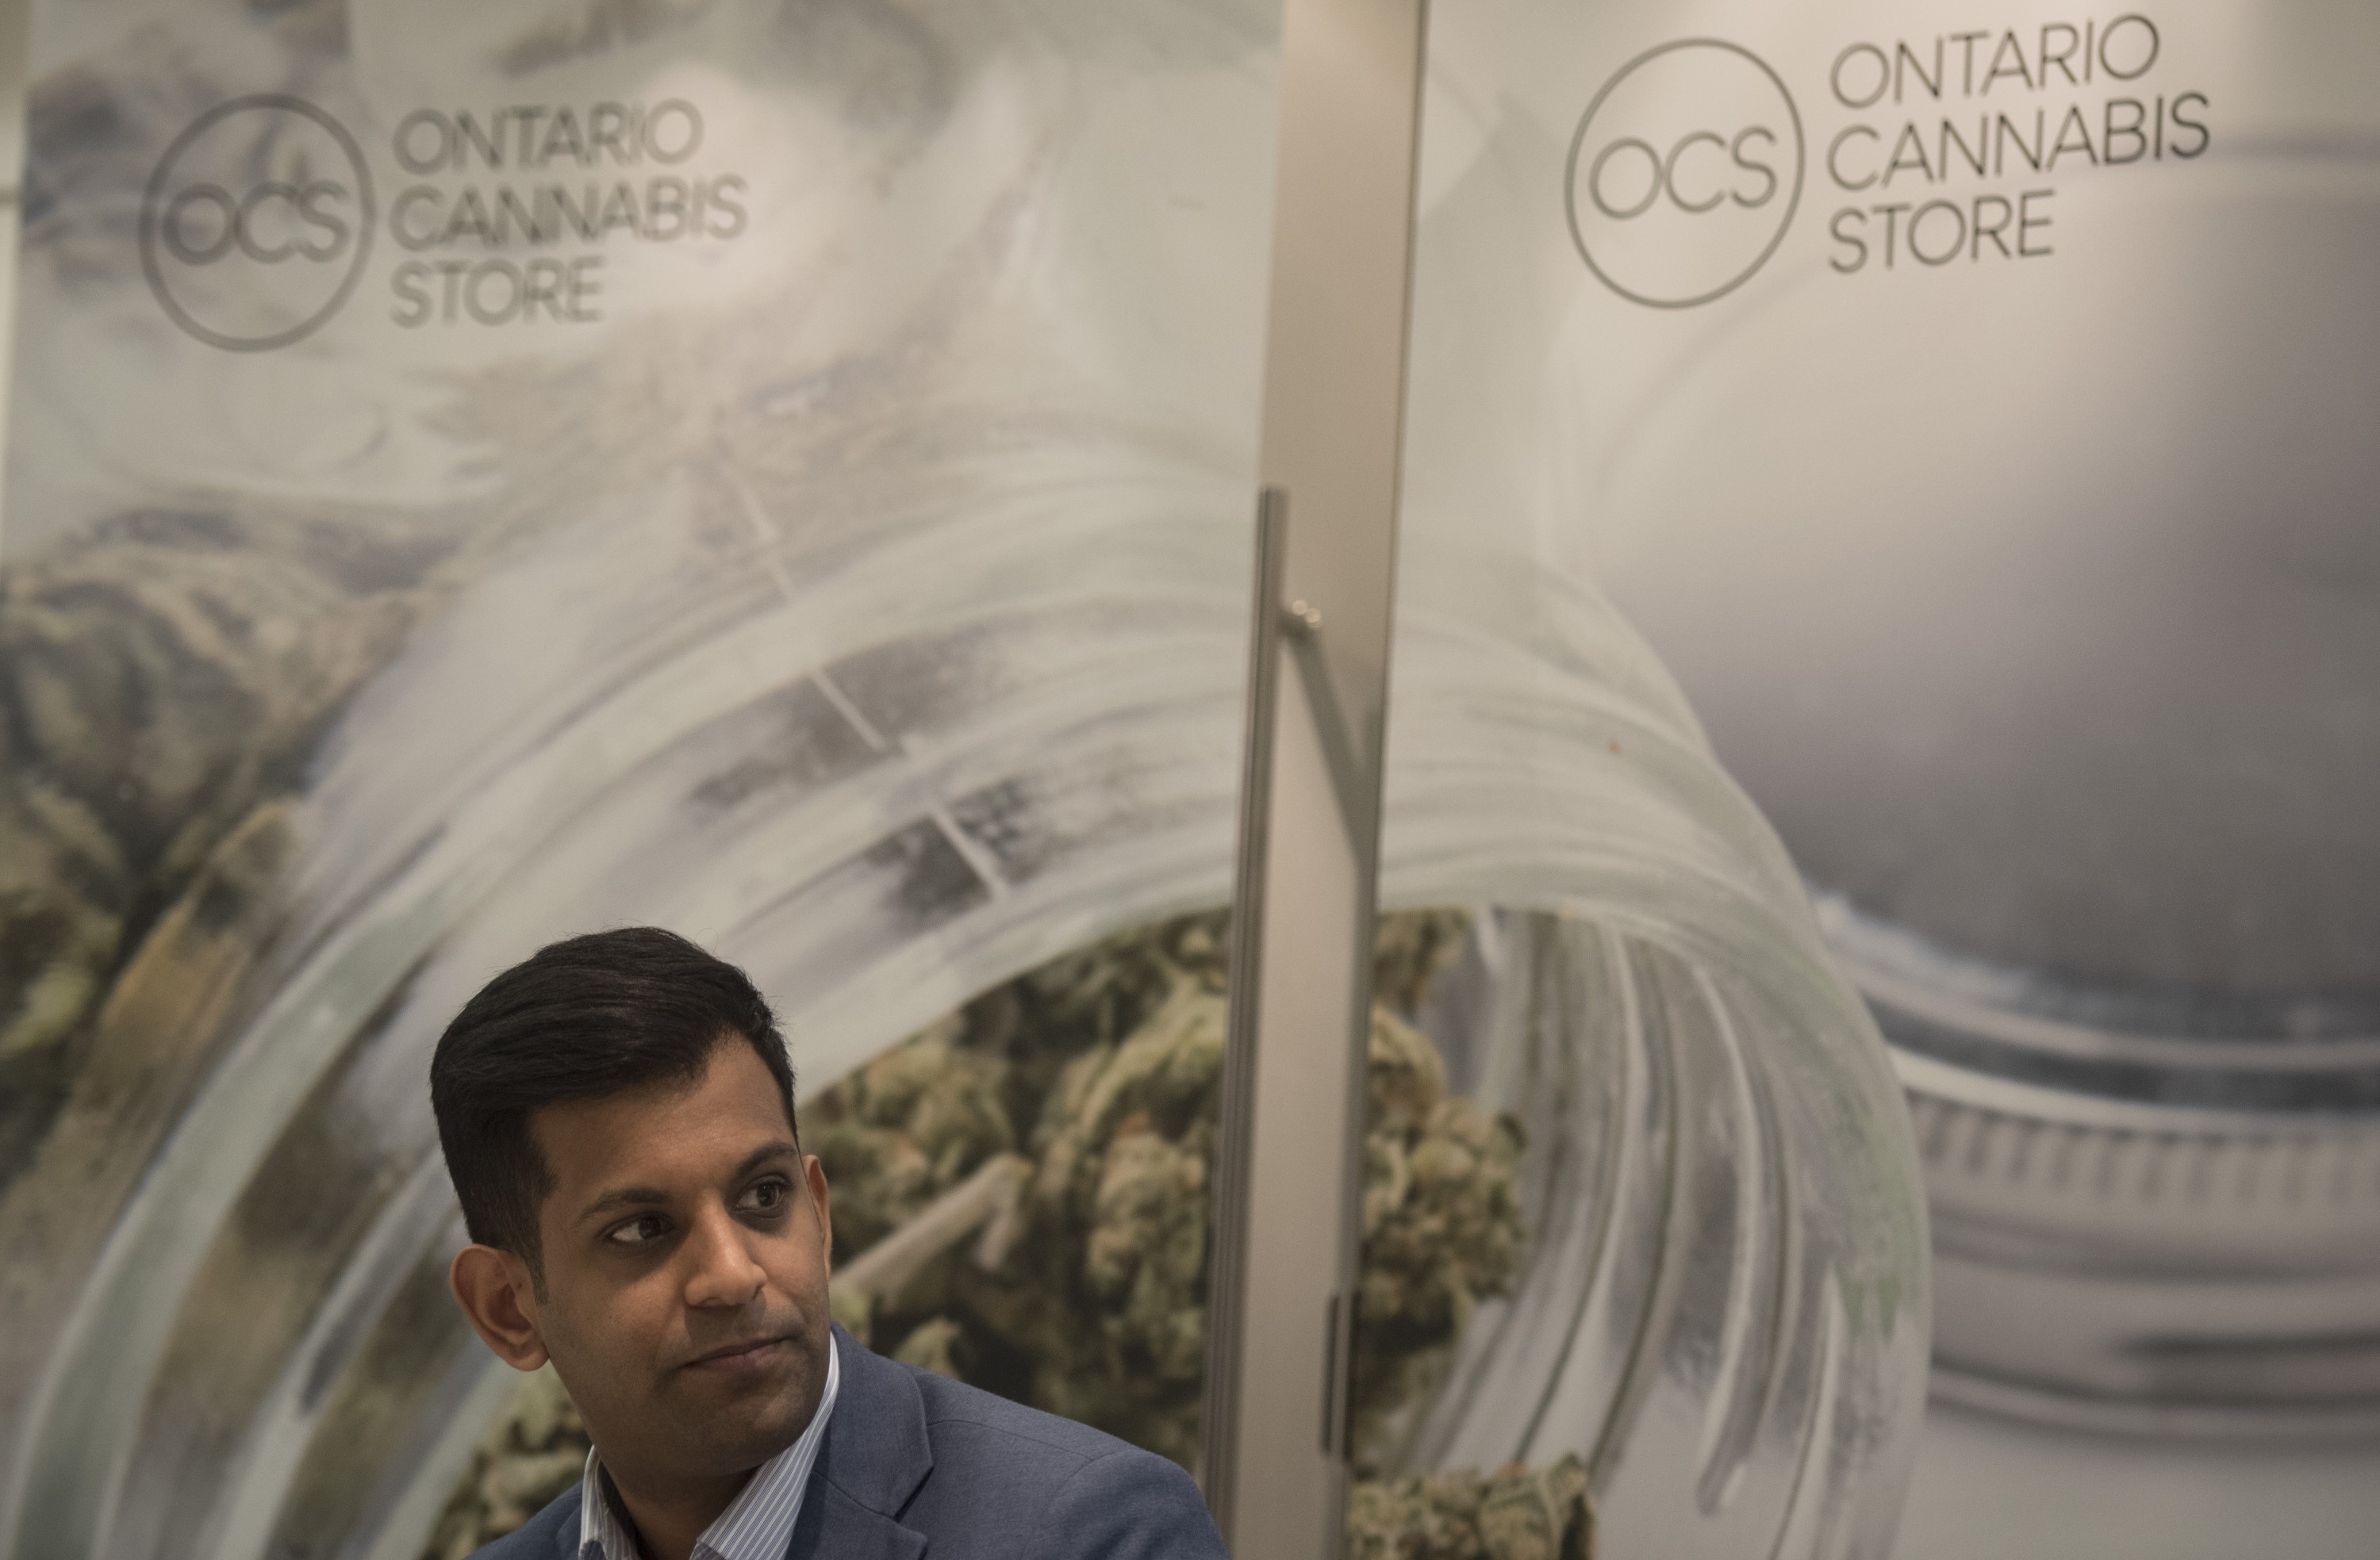 Barrie, Ont., shop one of seven stores busted for selling illegal cannabis